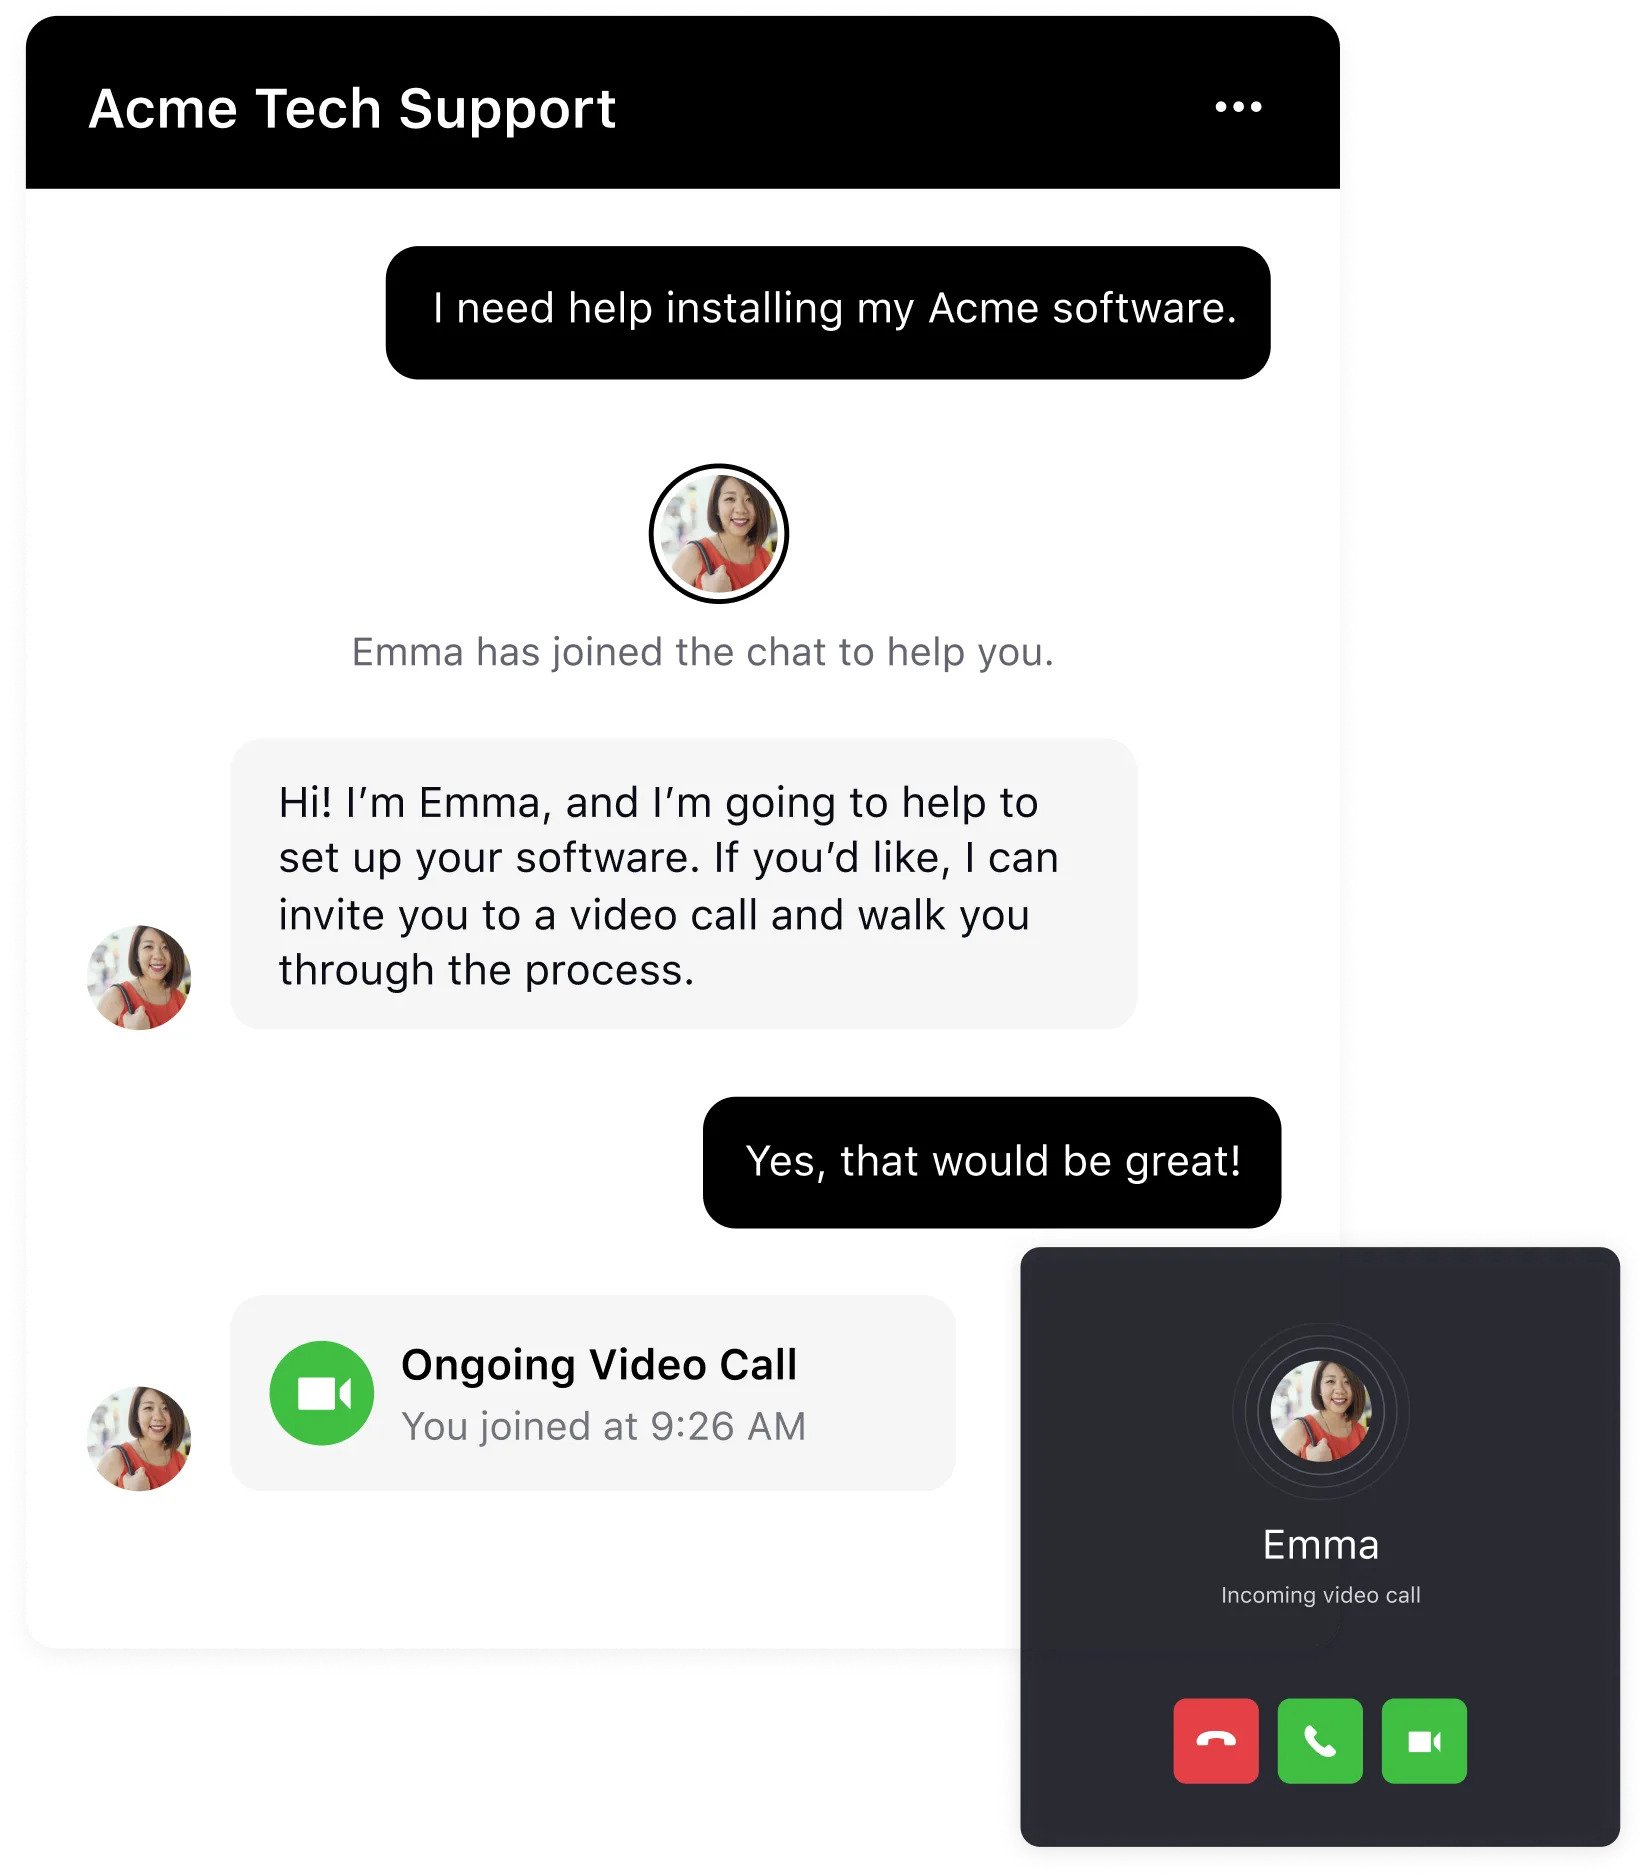 Video chat customer service channel